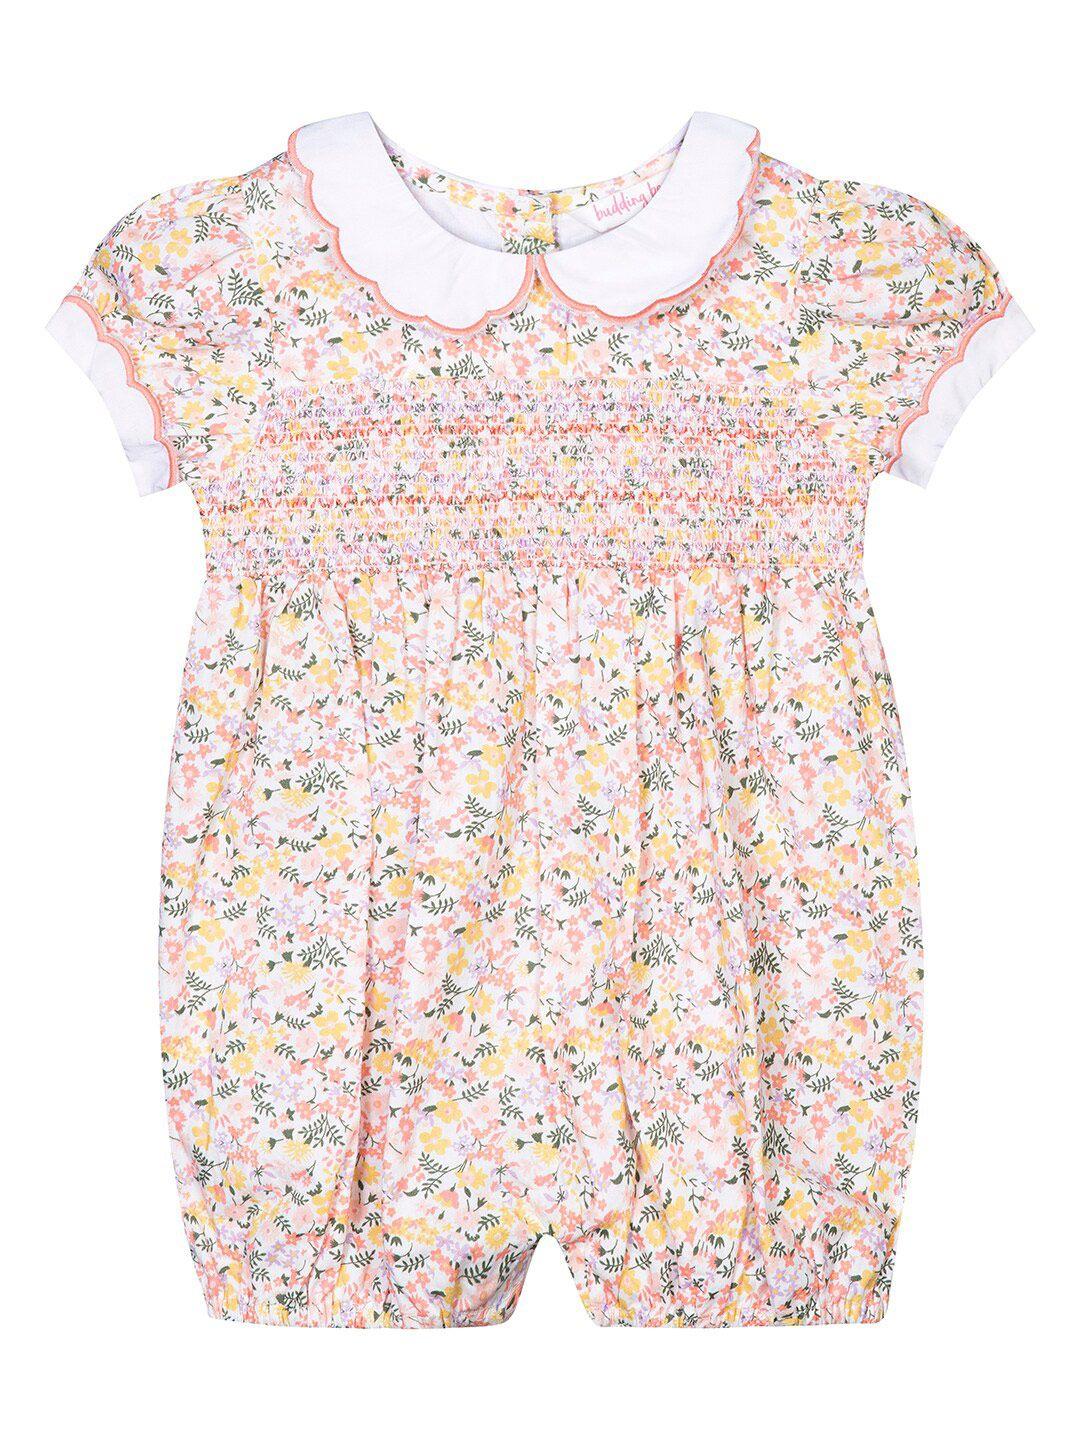 budding-bees-girls-cotton-printed-rompers